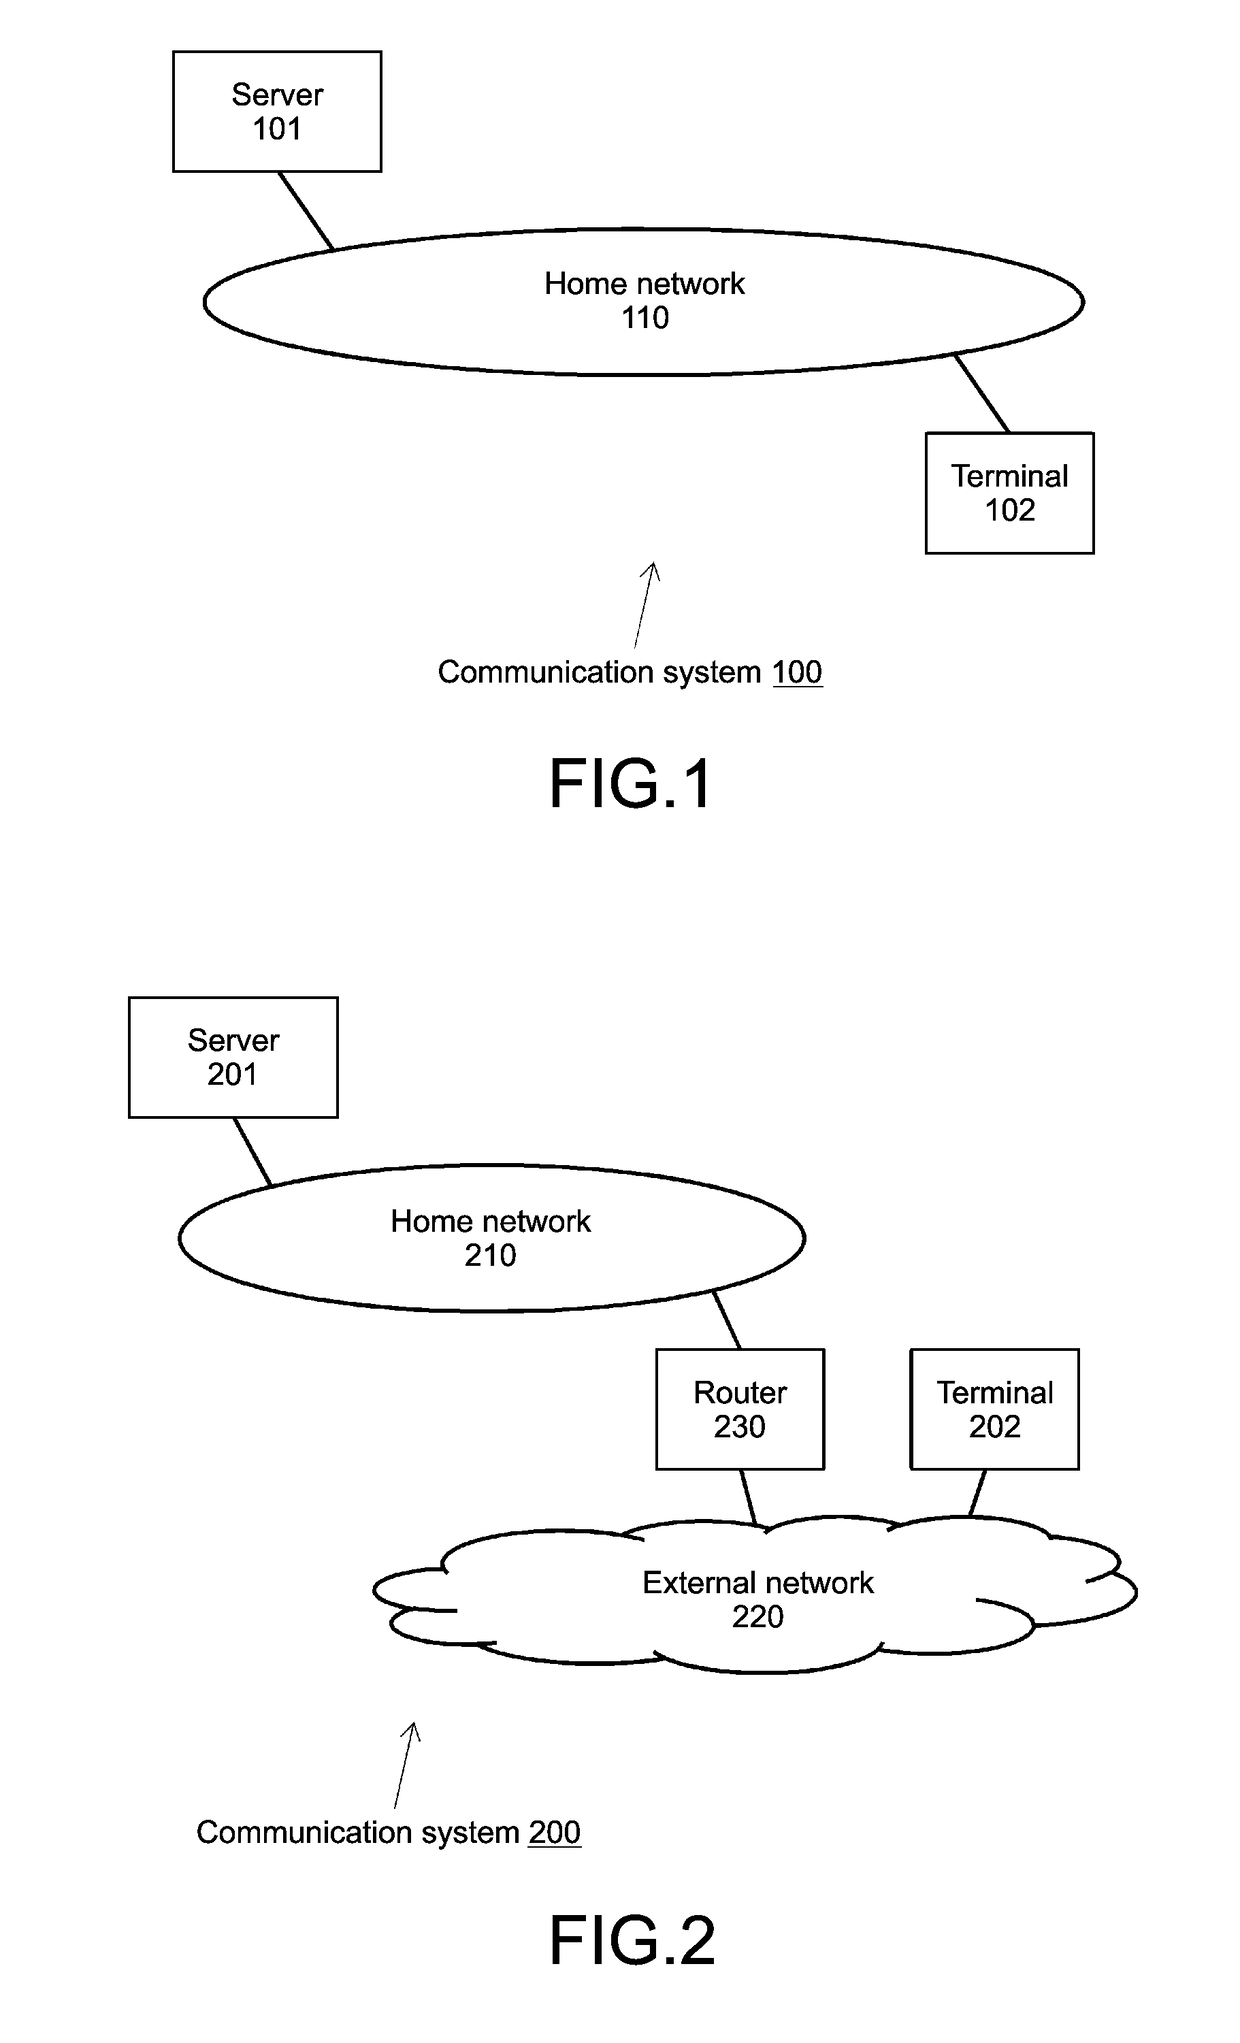 Restriction of use that exceeds a personal use range when transmitting a content accumulated at home via an external network